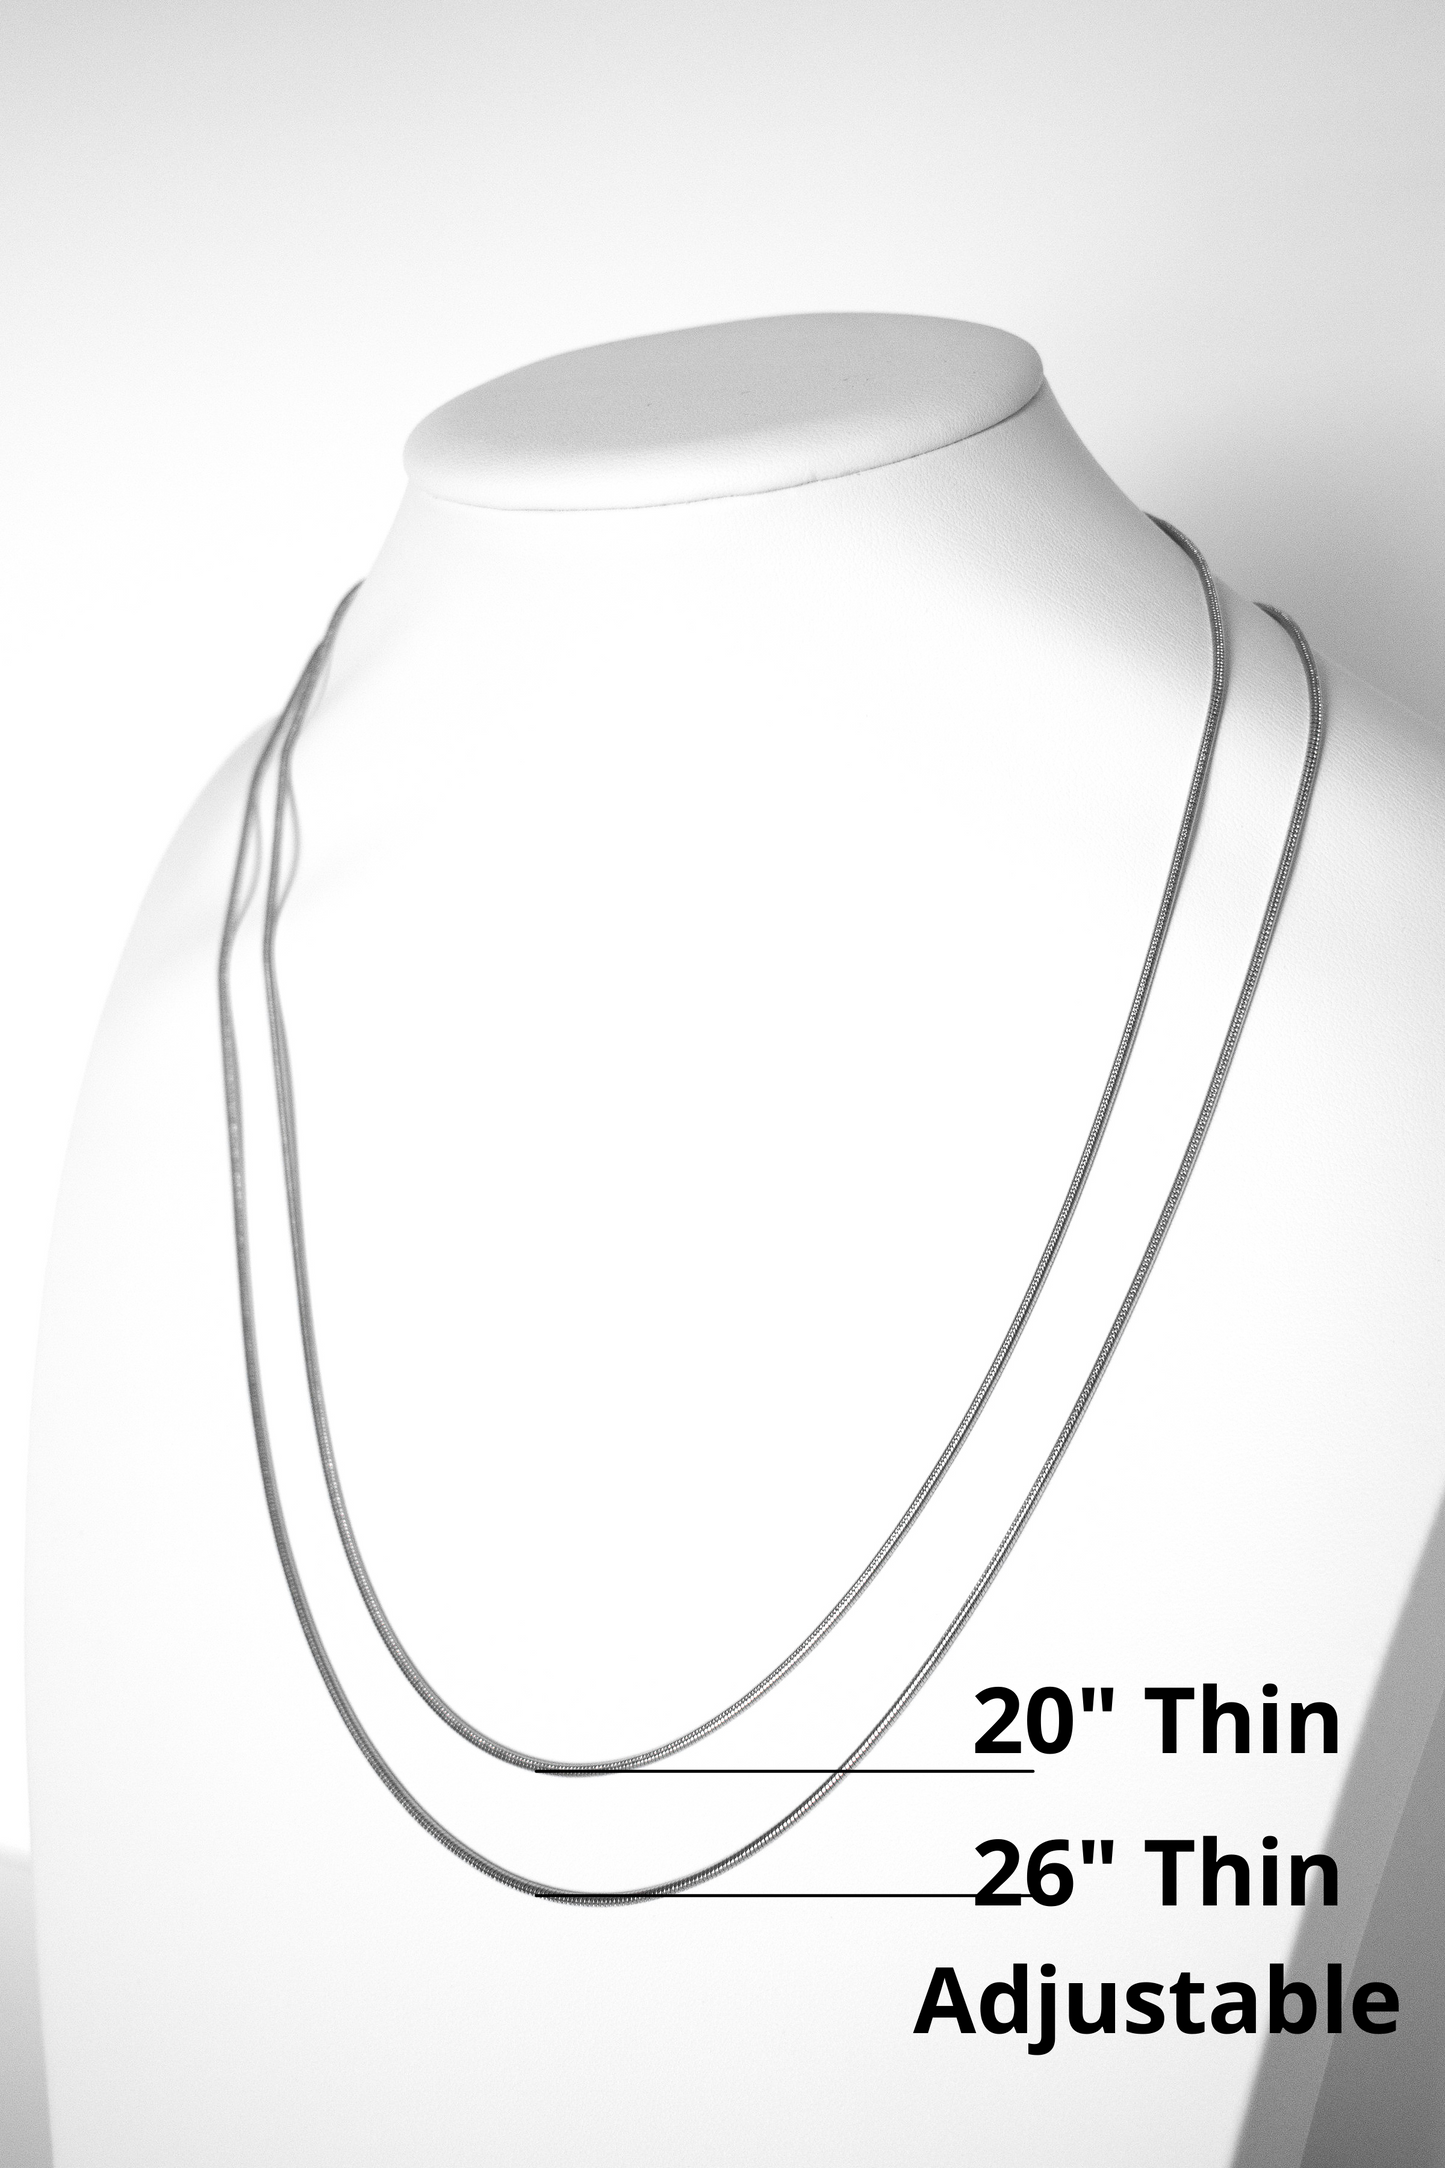 Stainless Steel Snake Necklaces - 16" 18" 20" 20" thin 22" 26" adjustable thin - Extra Chain Jewelry